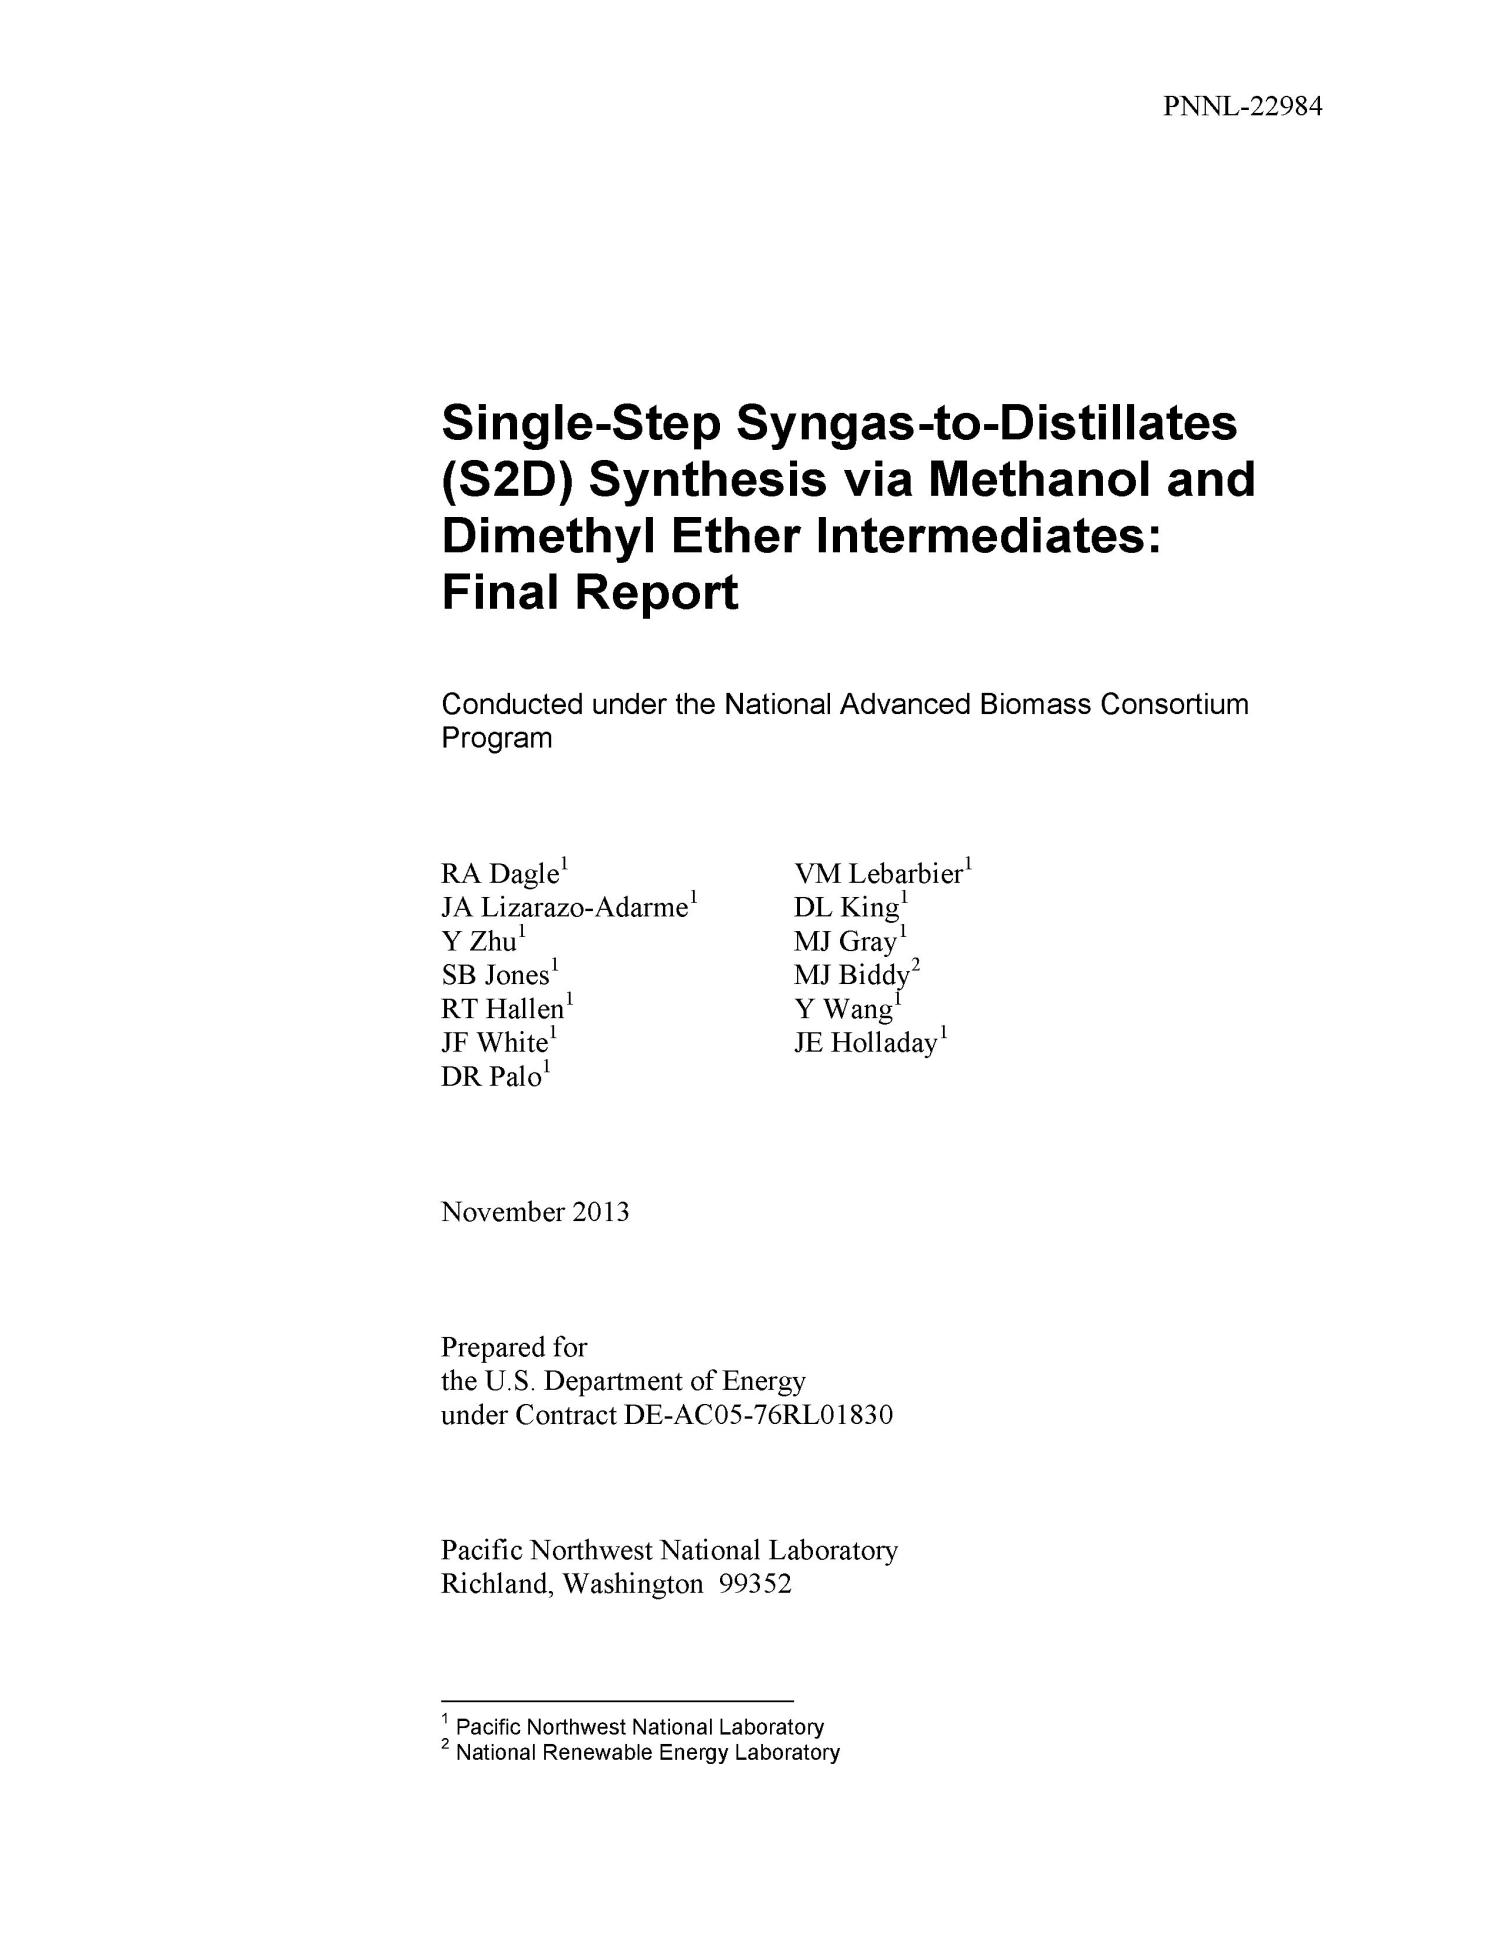 Single-Step Syngas-to-Distillates (S2D) Synthesis via Methanol and Dimethyl Ether Intermediates: Final Report
                                                
                                                    [Sequence #]: 3 of 94
                                                